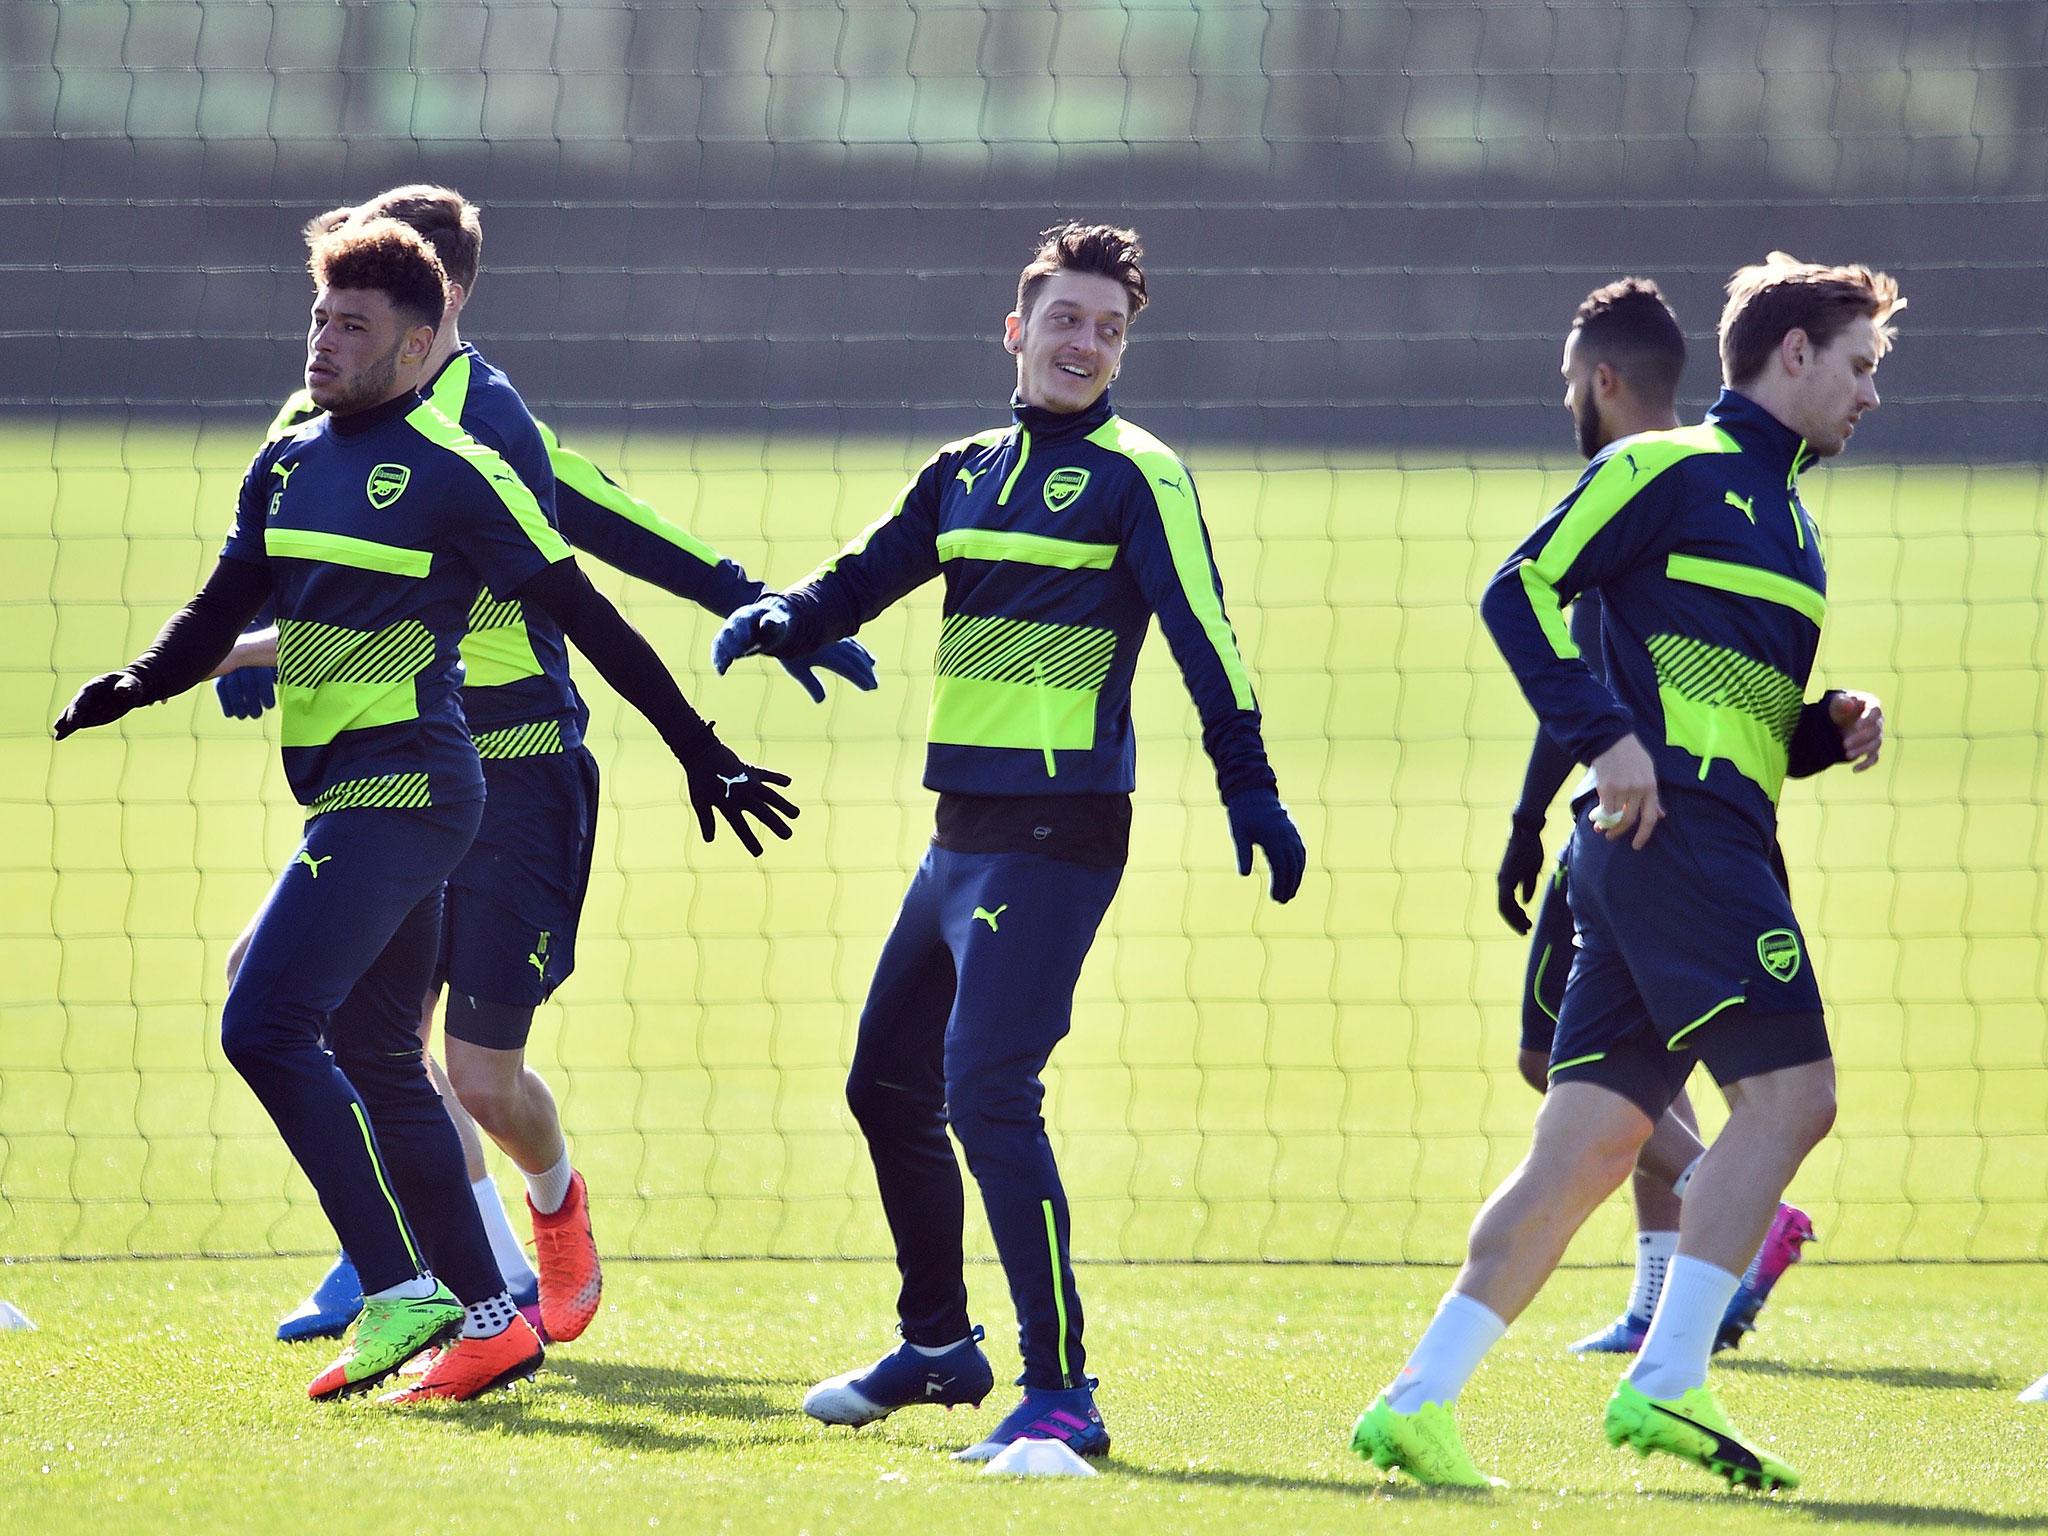 Mesut Ozil trained with his Arsenal teammates on Monday